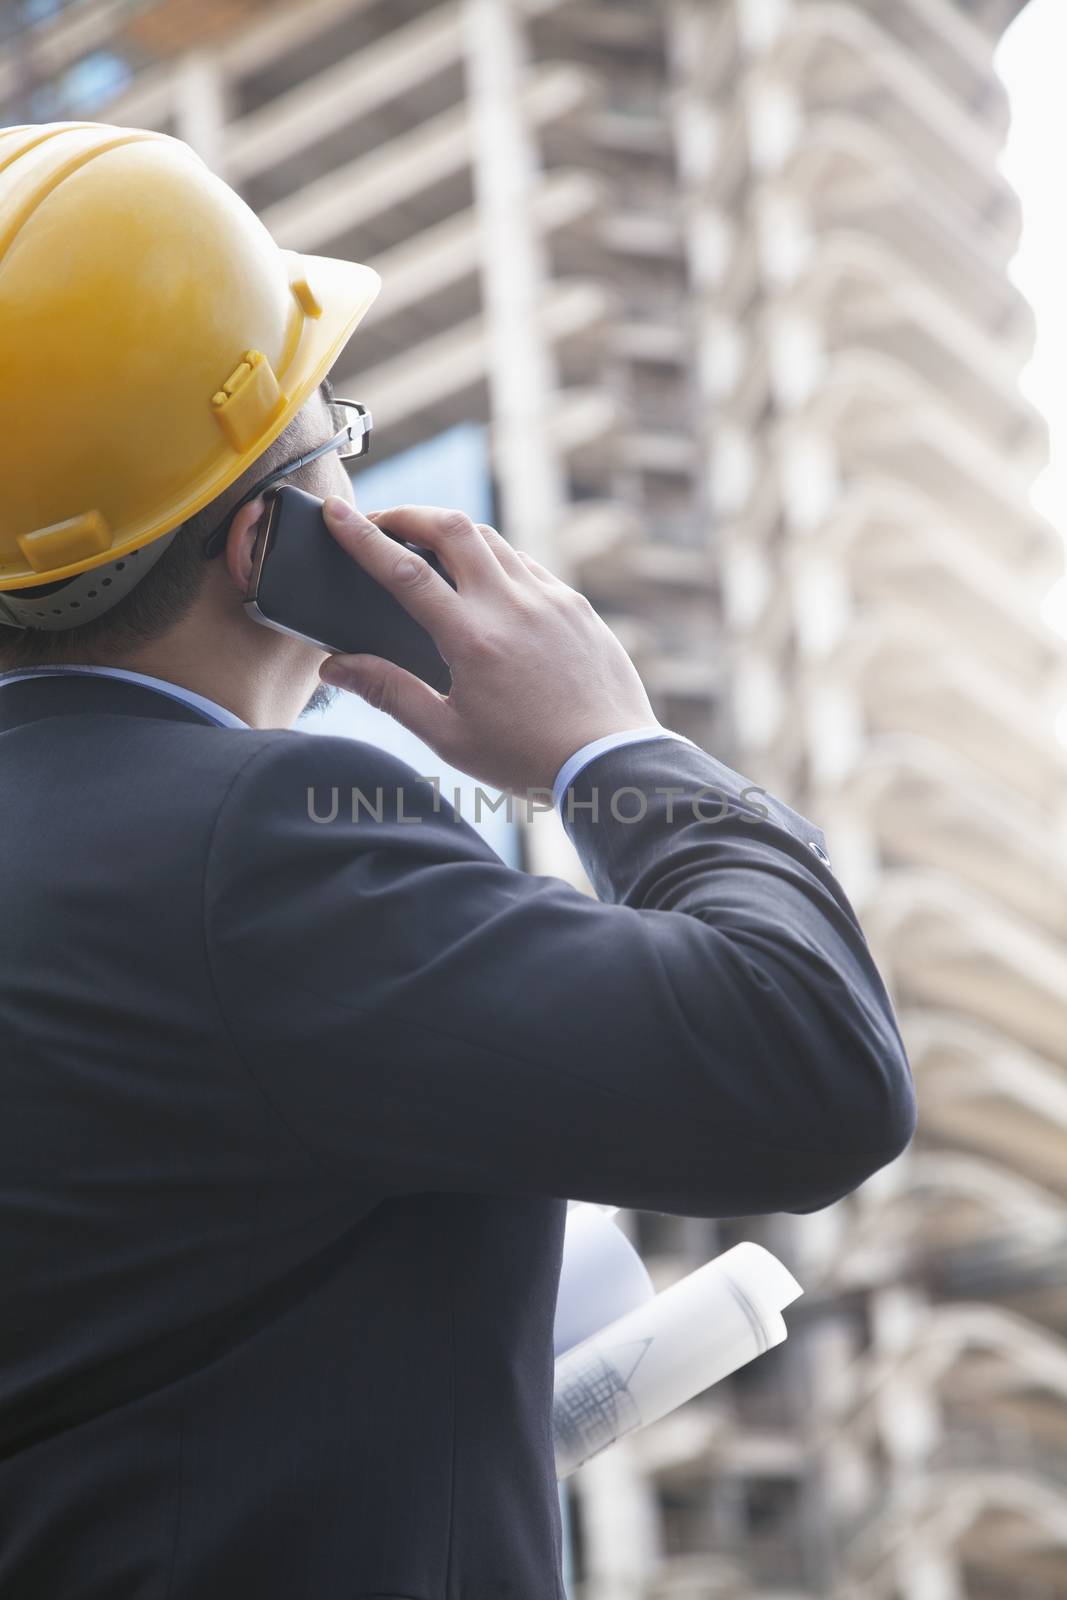 Architect on the phone at a construction site